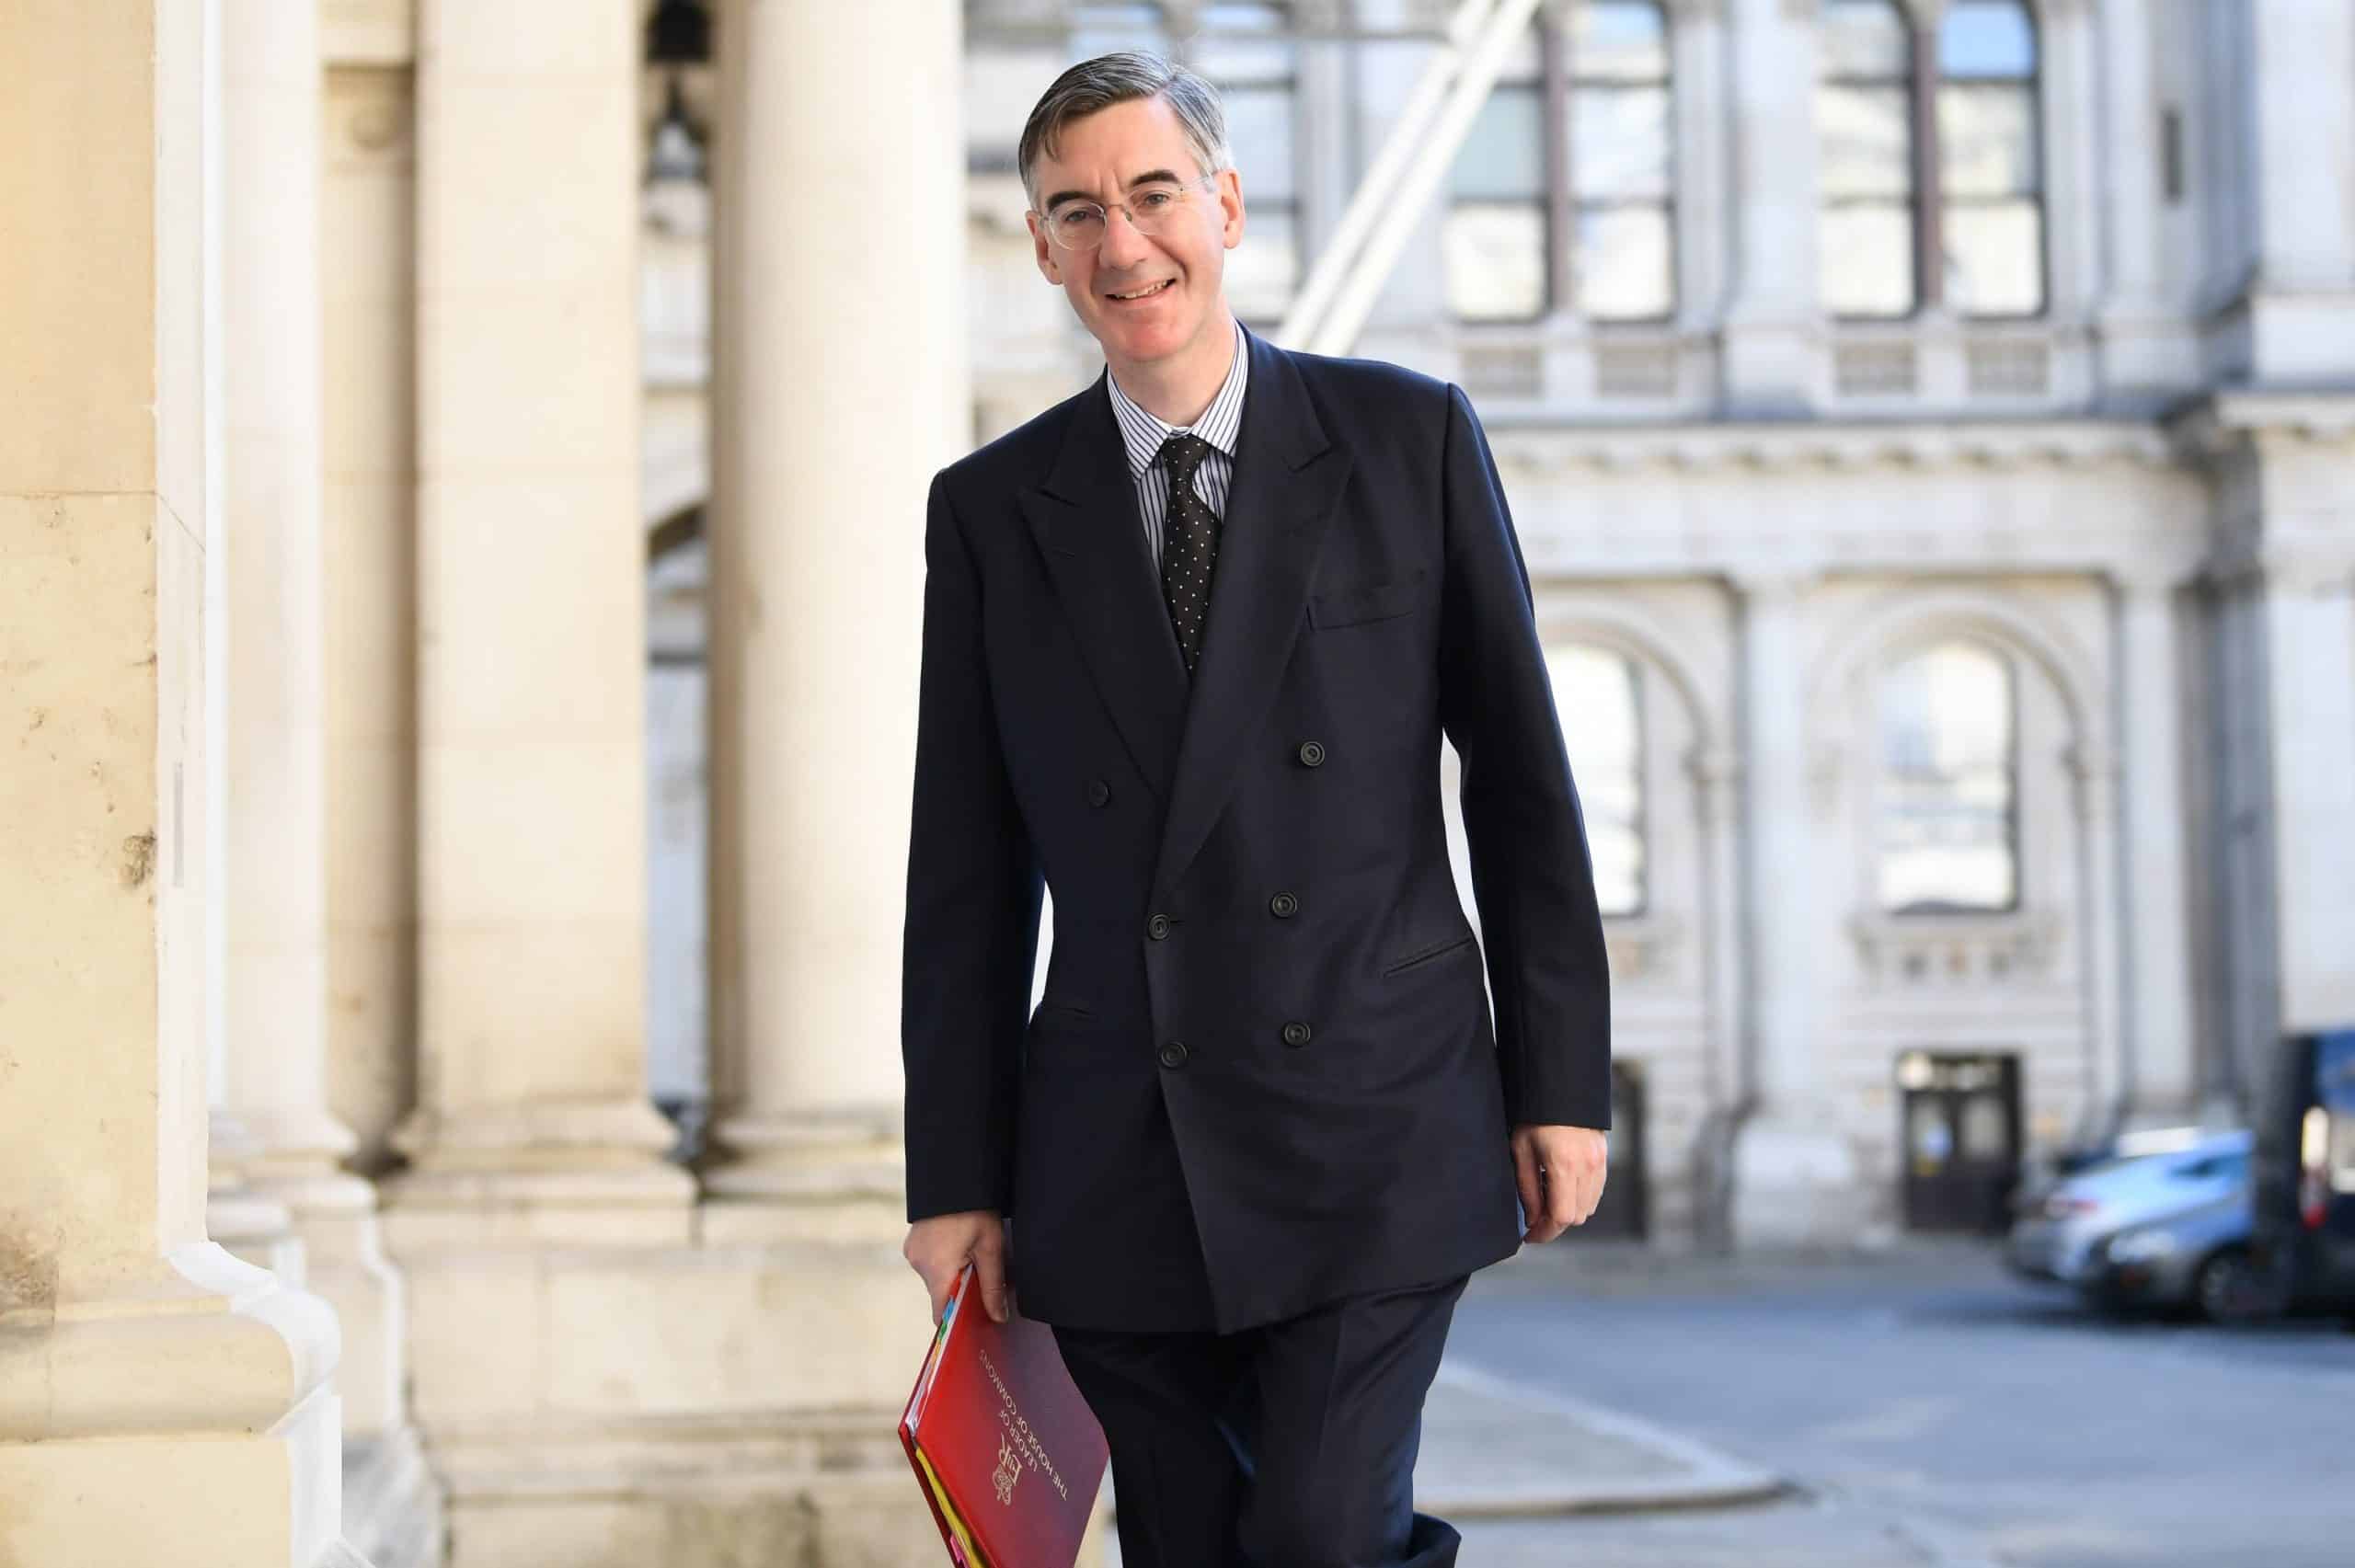 Watch: Rees-Mogg plays Rule, Britannia! in the Commons